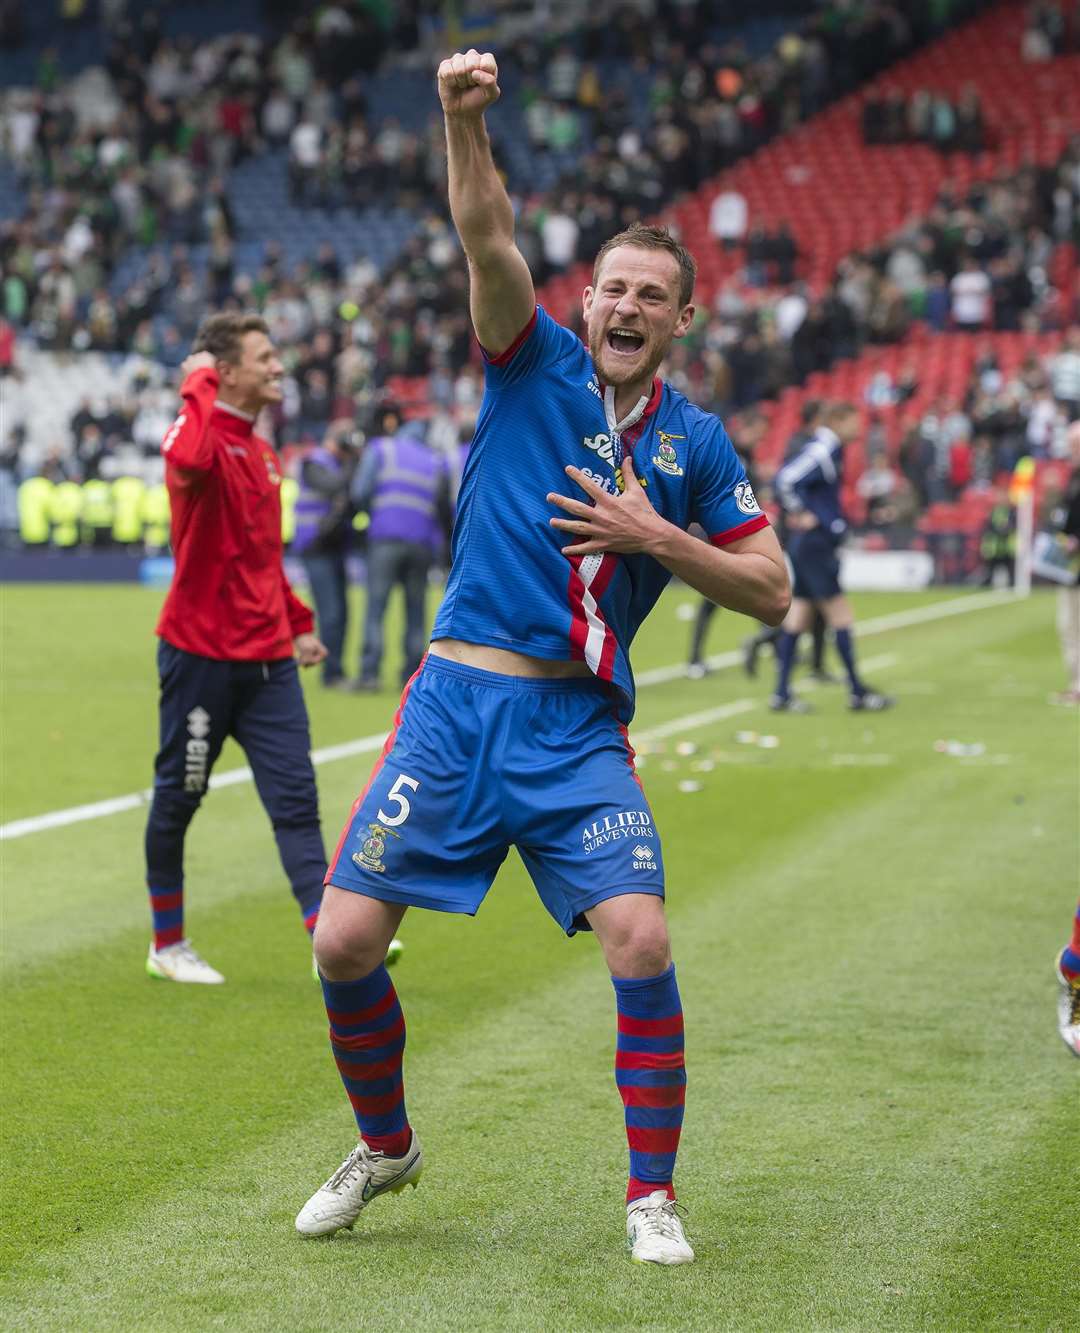 Picture - Ken Macpherson, Inverness. Scottish Cup semi-final. Inverness CT(3) v Celtic(2). 19.04.15. ICT's Gary Warren celebrates at the end.